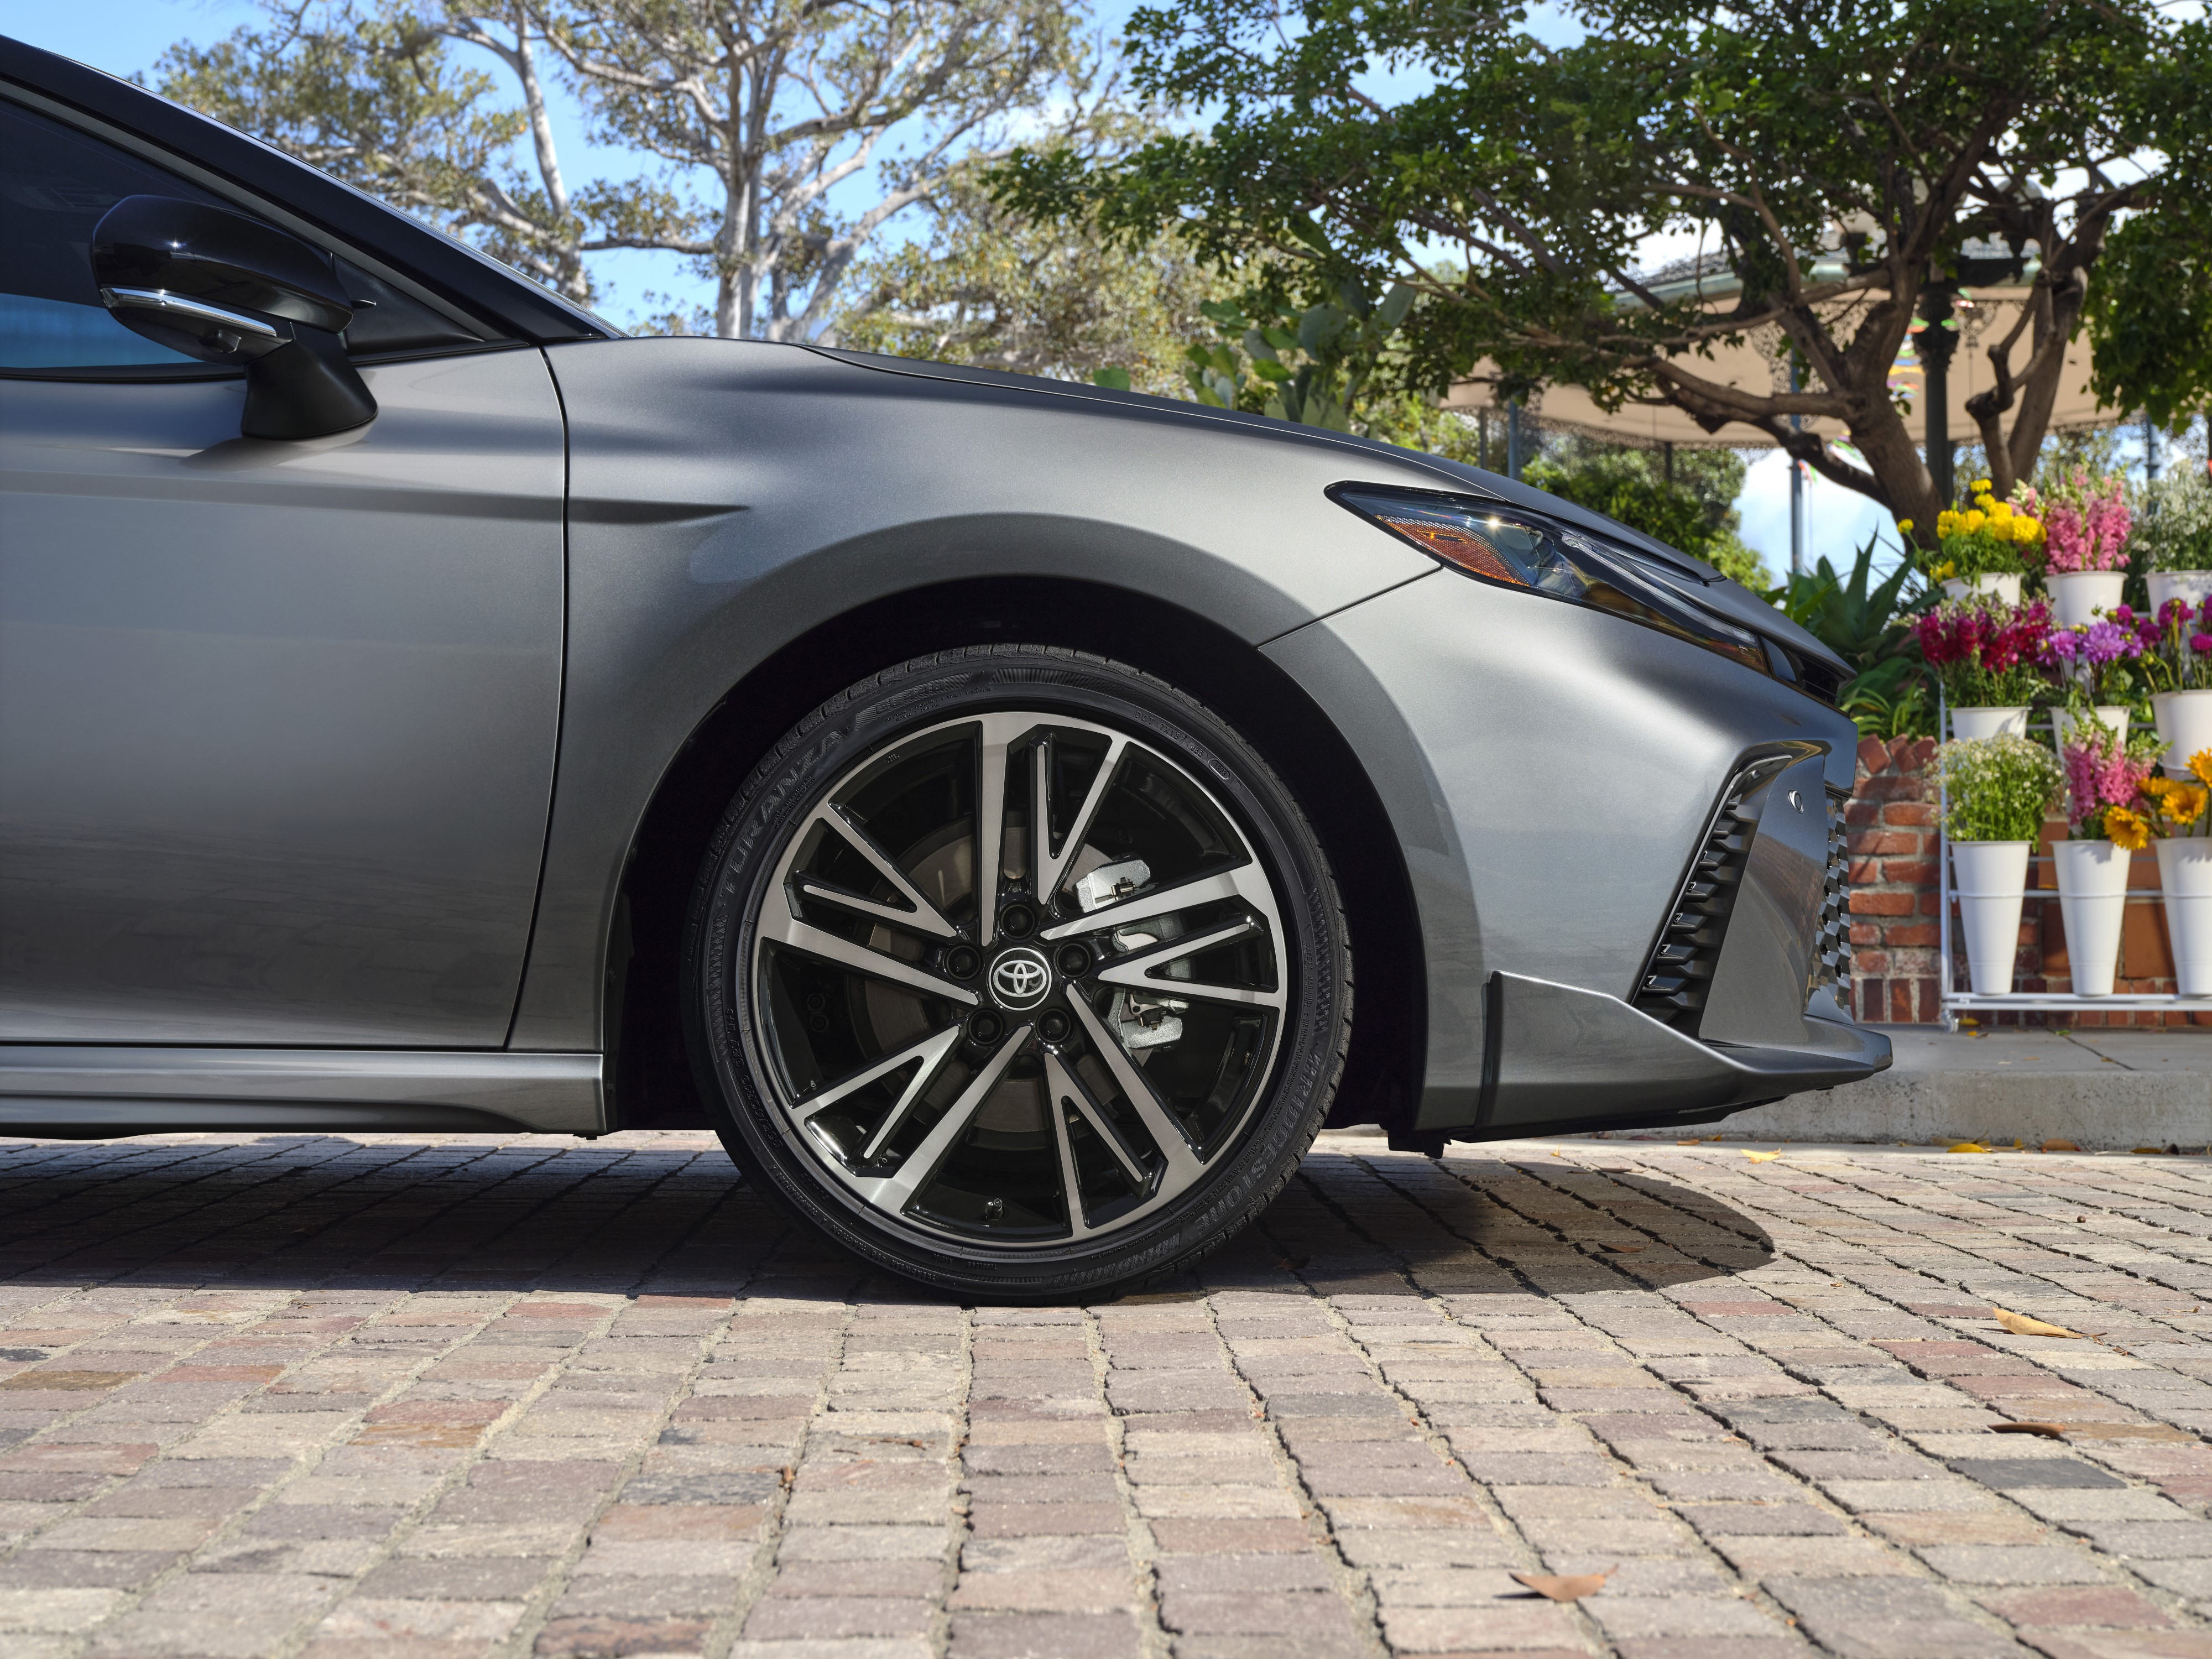 2025 Toyota Camry XSE in Celestial Silver Metallic with 19-inch 15-spoke Aluminum Wheels and Toranza Tires